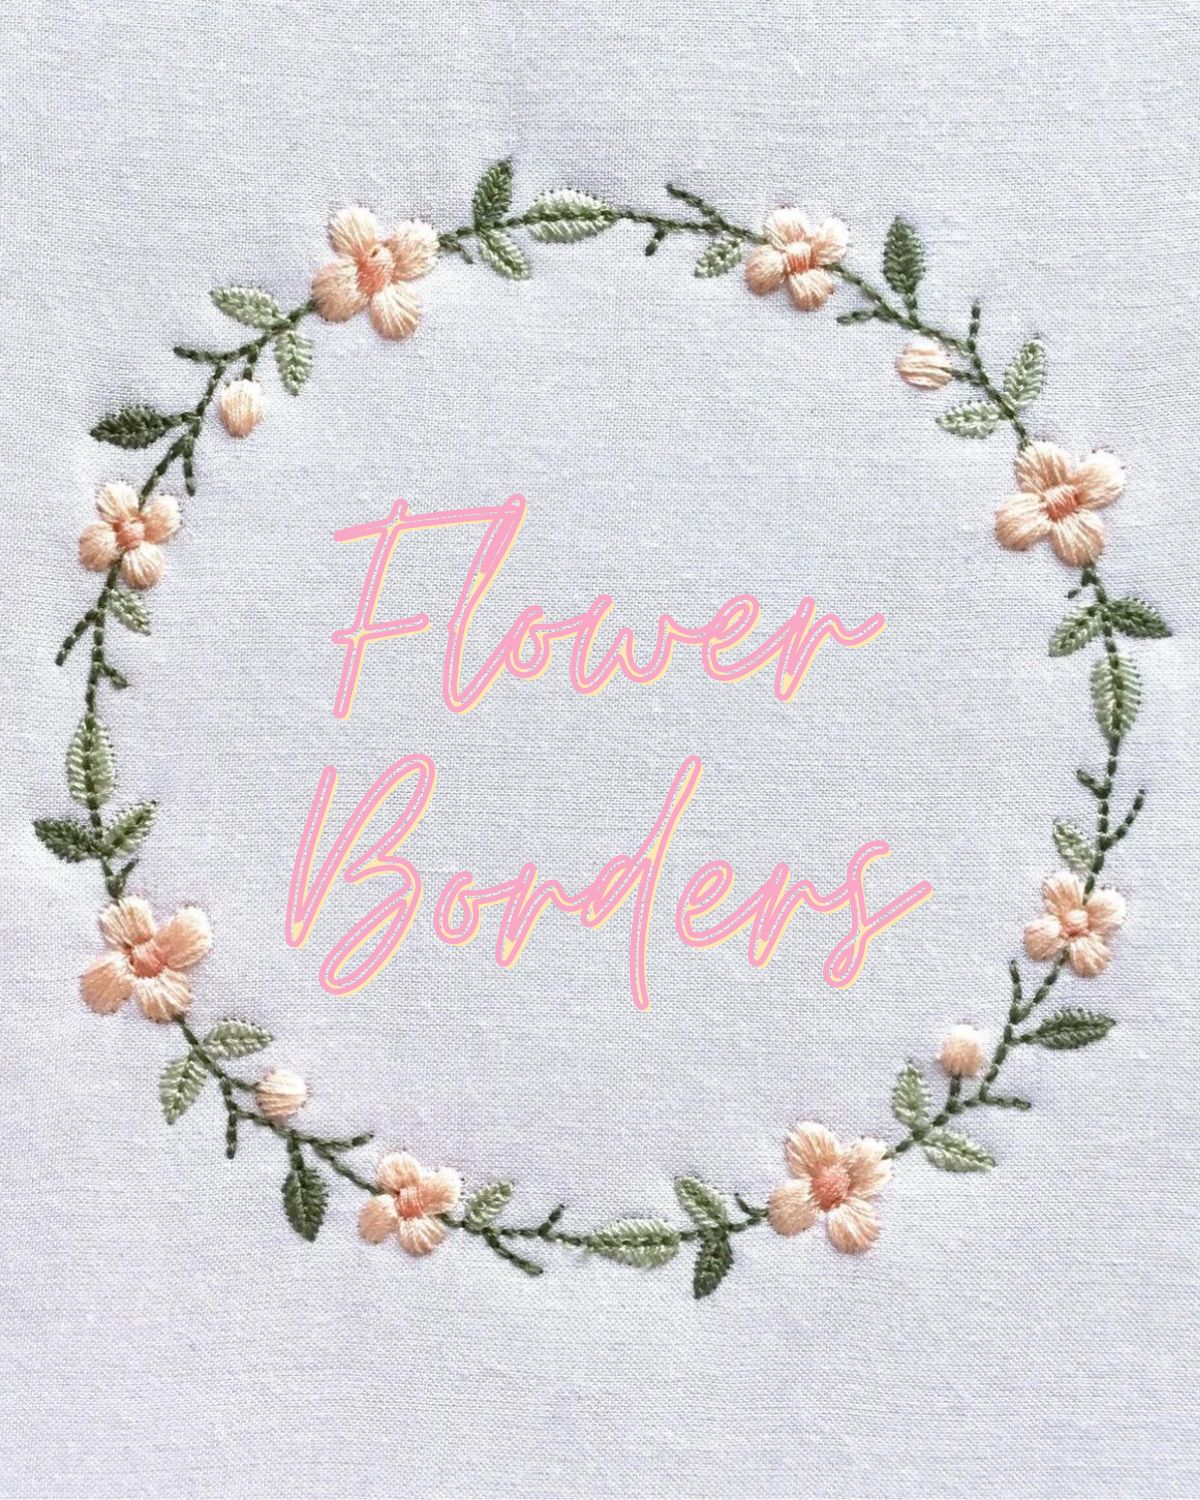 A circle flower border embroidery piece 